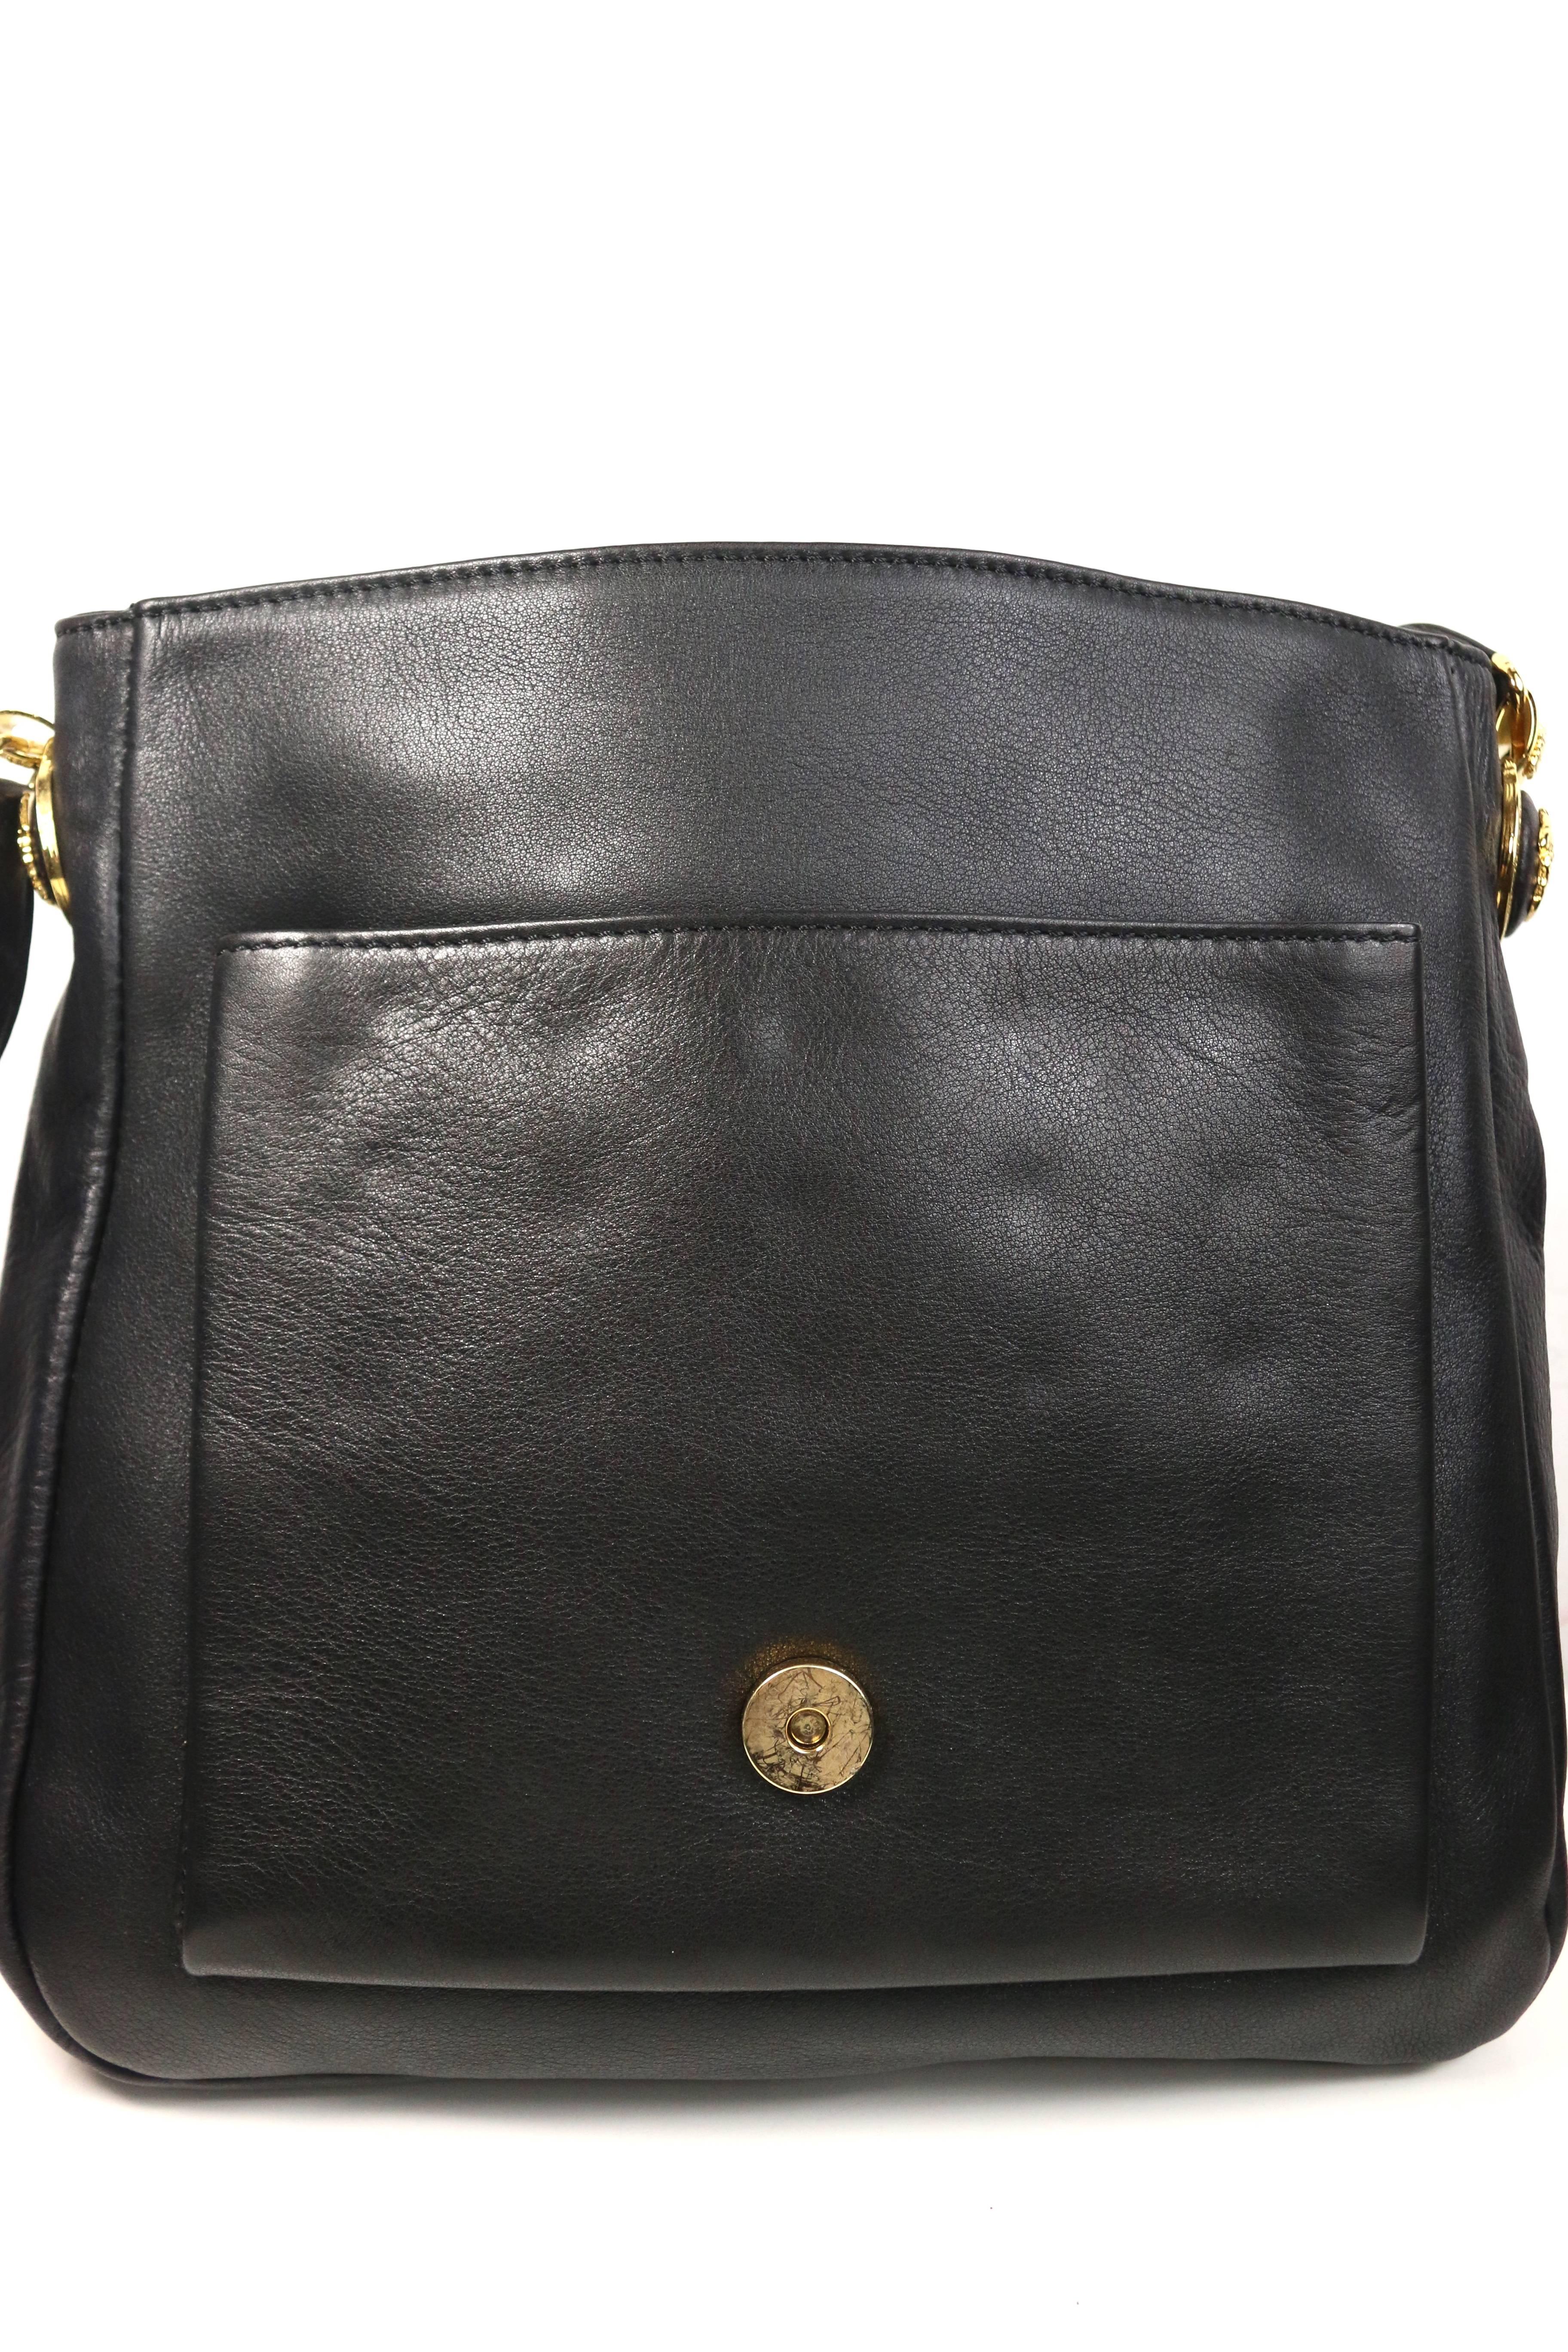 Women's Gianni Versace Couture Black Lambskin with Gold Toned 